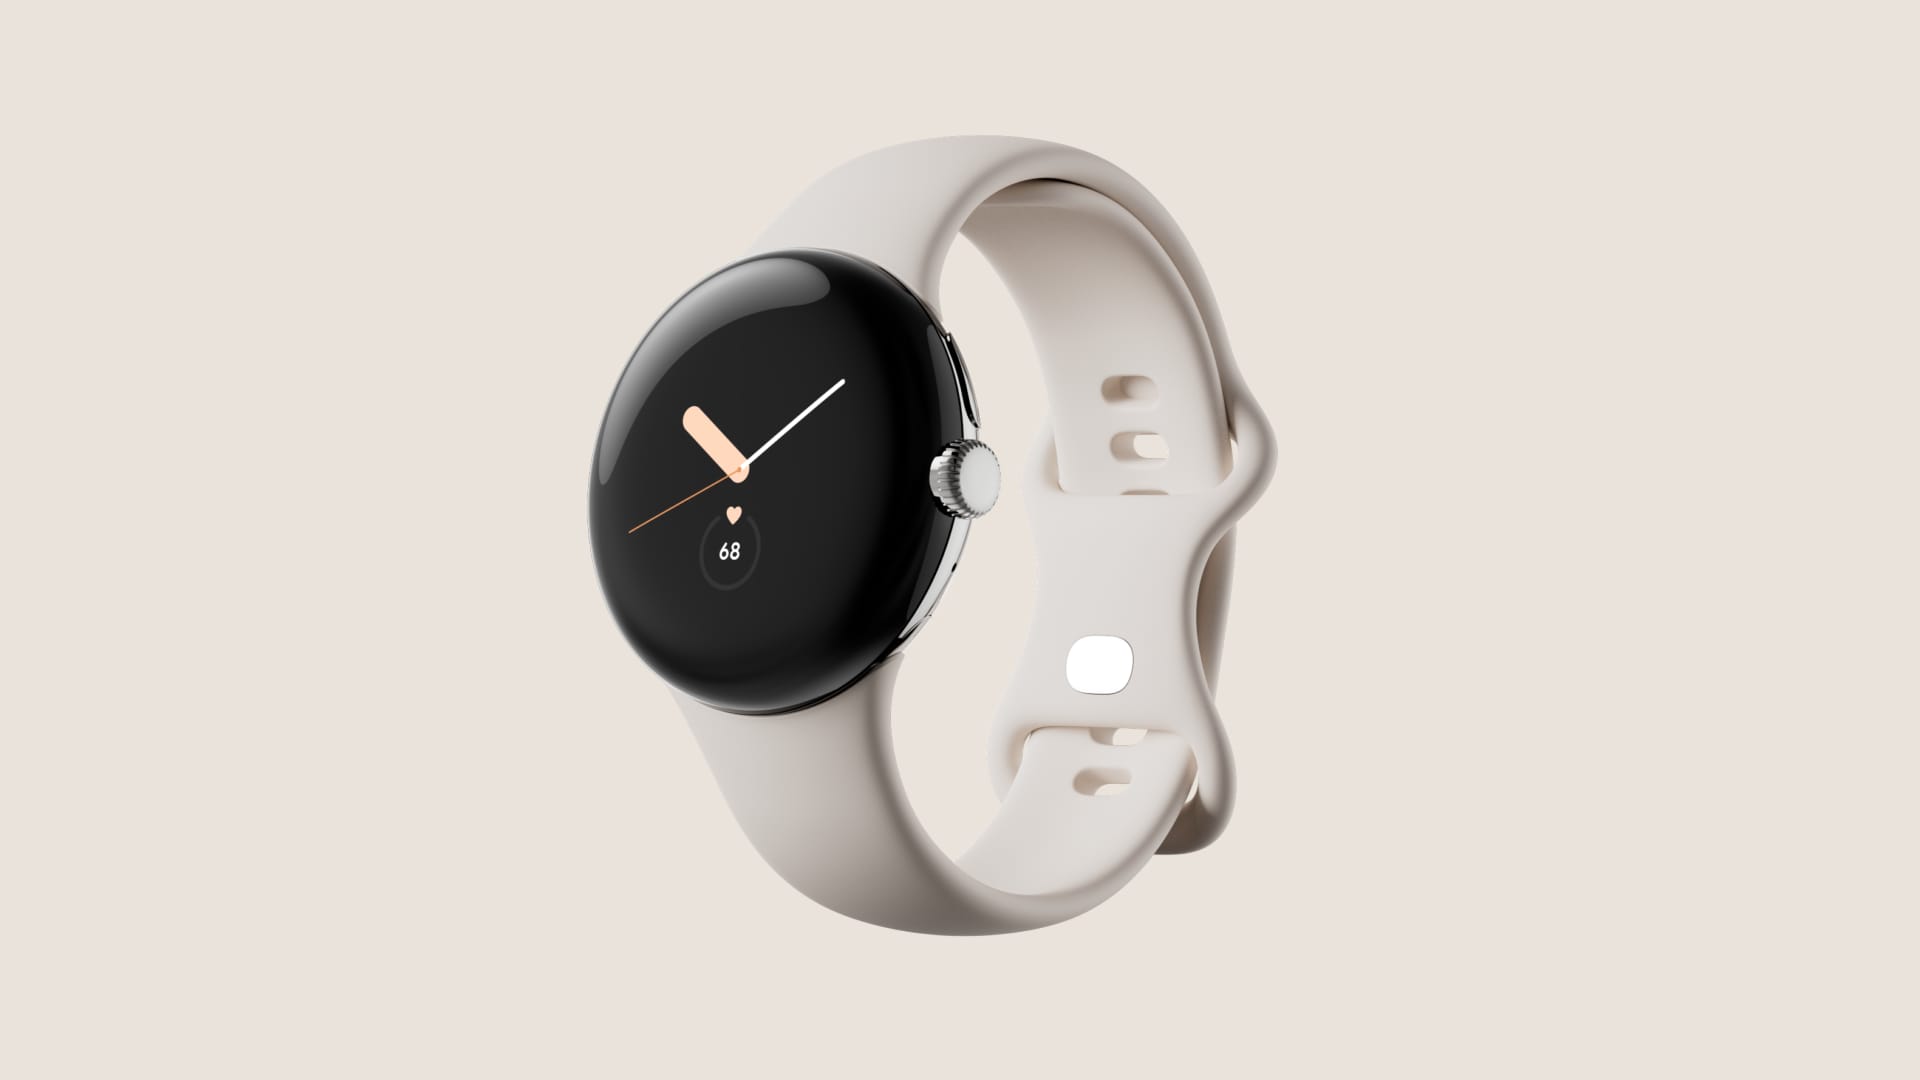 107058217-1652119282707-Google_Pixel_Watch_1 Google Announces Its First Smartwatch, a New Budget Phone and More